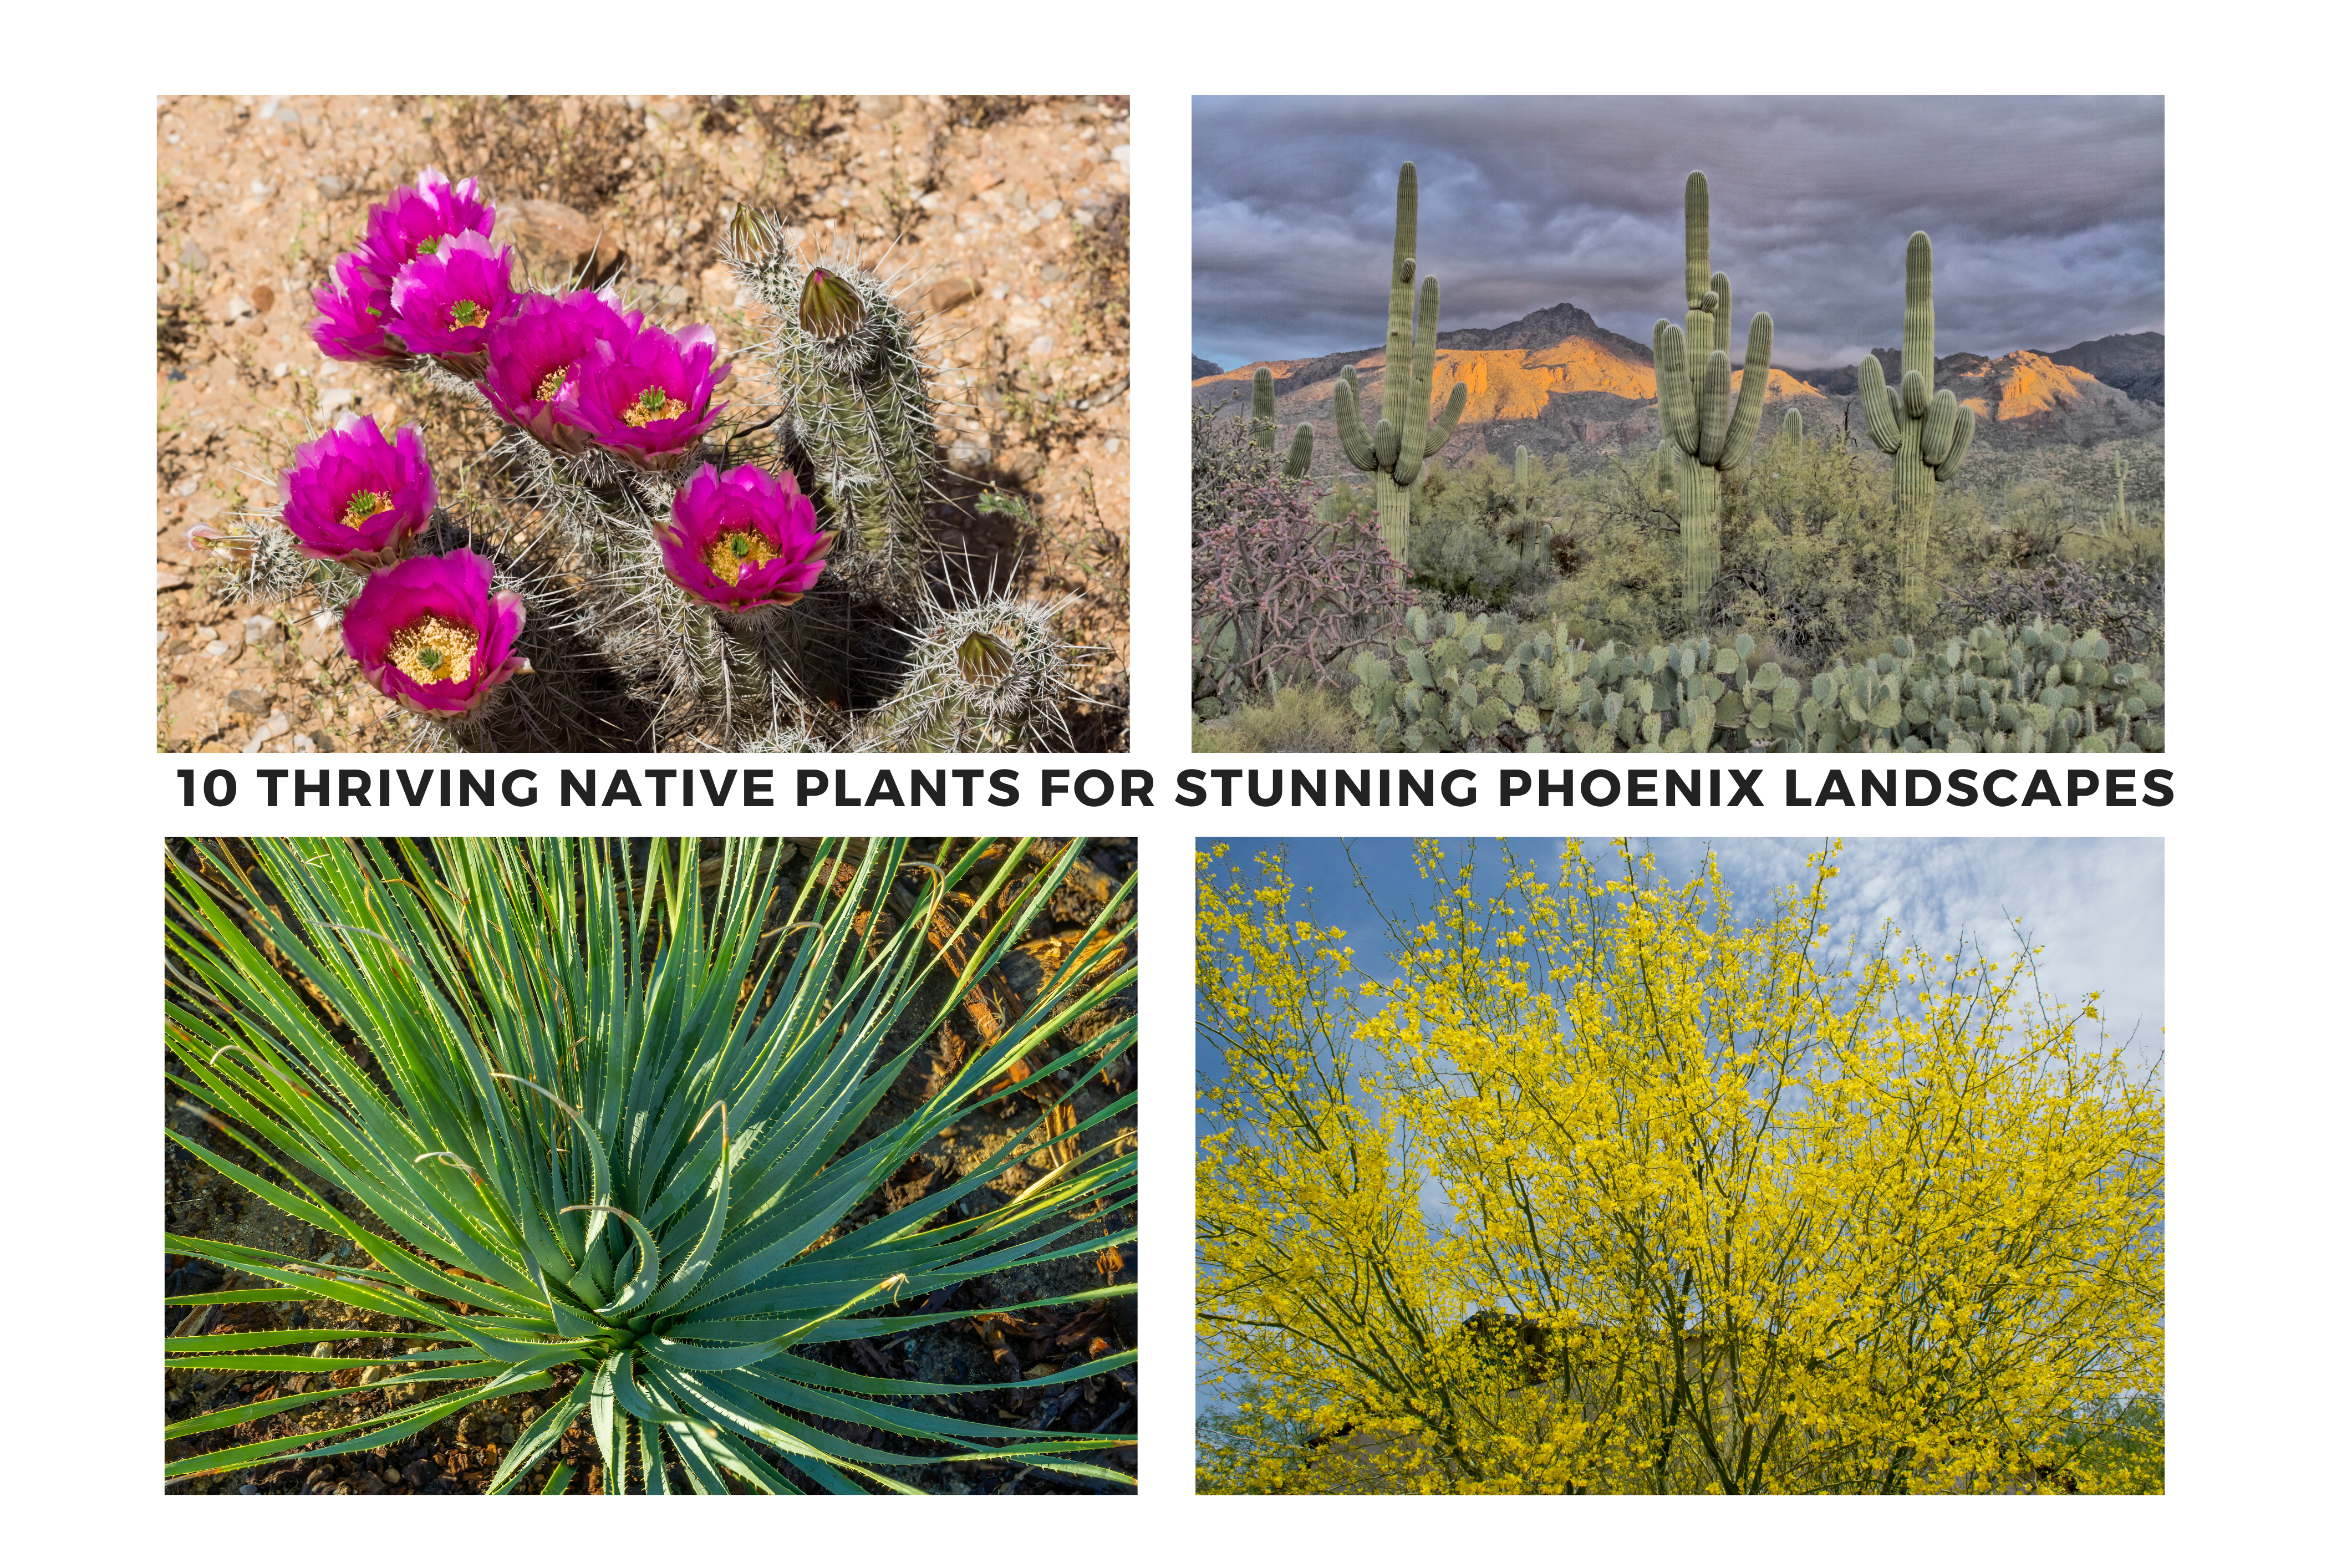 Thriving Native Plants for Phoenix Landscapes with 4 example pictures